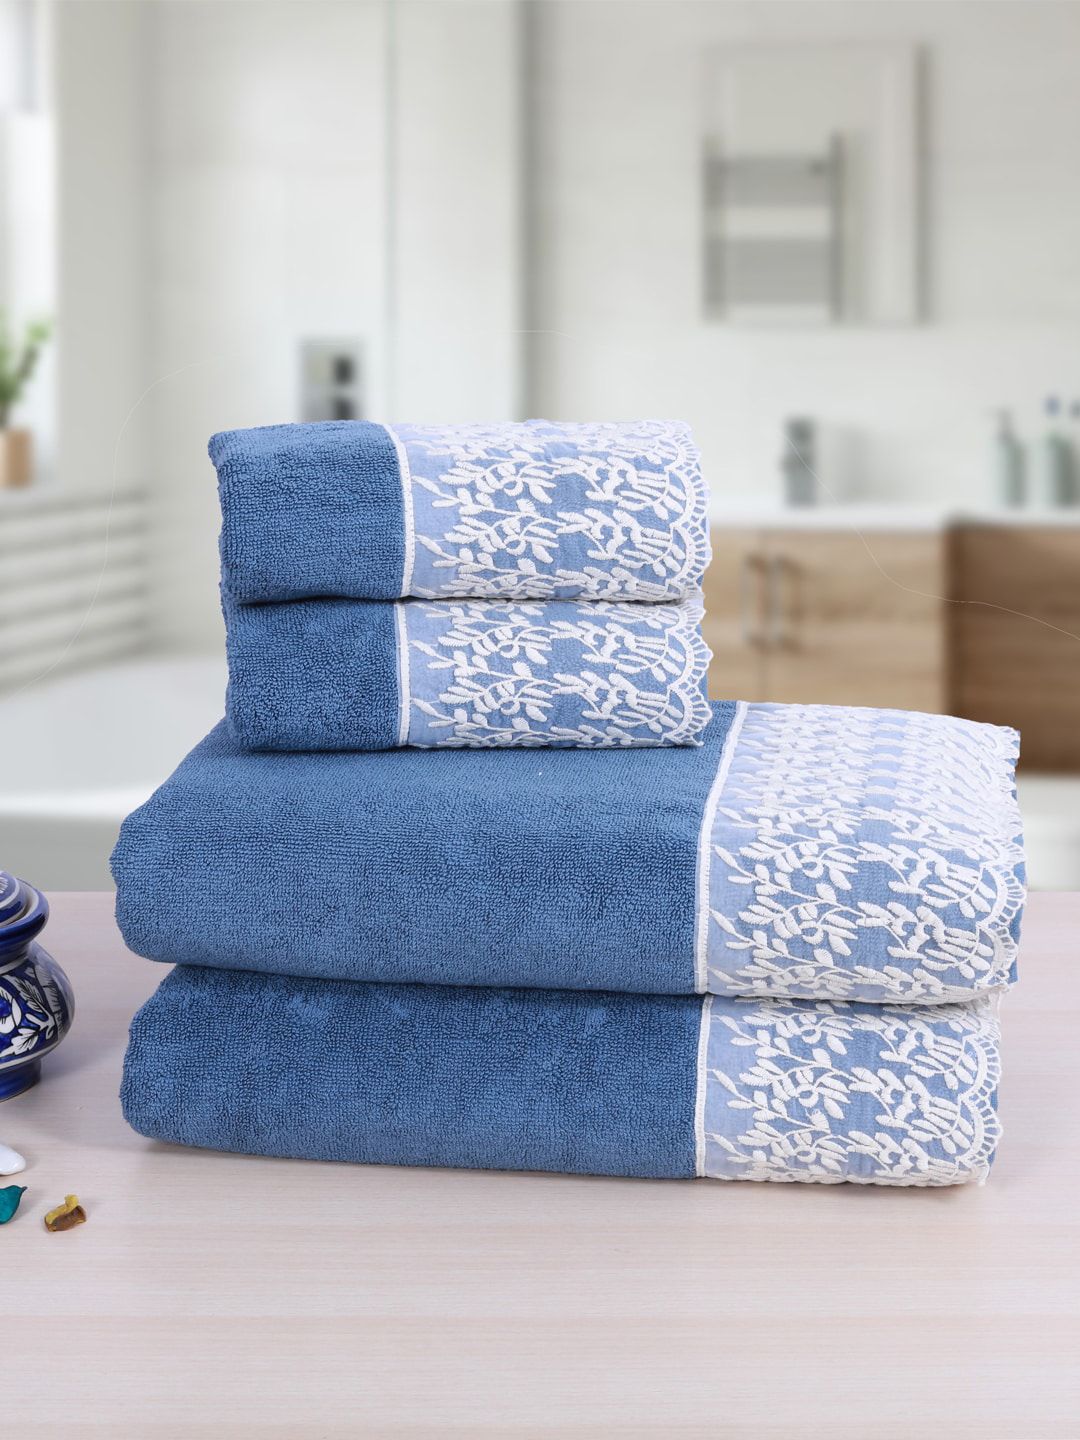 RANGOLI Set Of 4 Blue & White Embroidered 550 GSM Towels Price in India